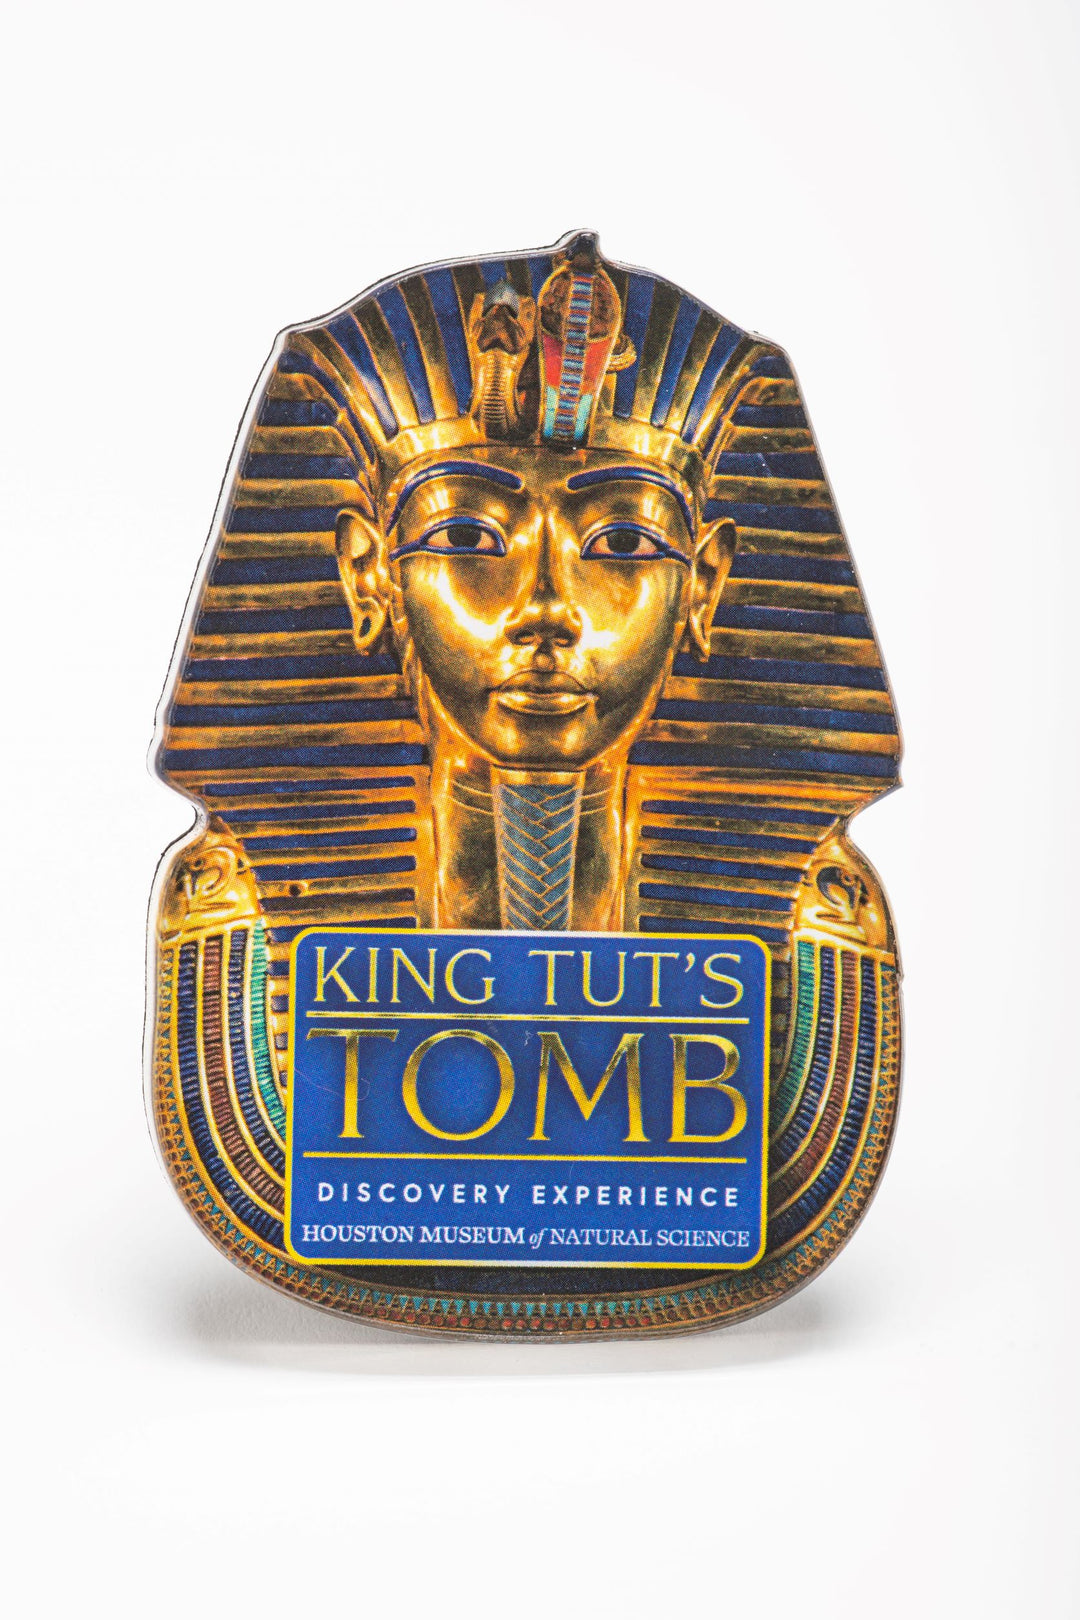 HMNS King Tut's Tomb Discovery Experience Magnet